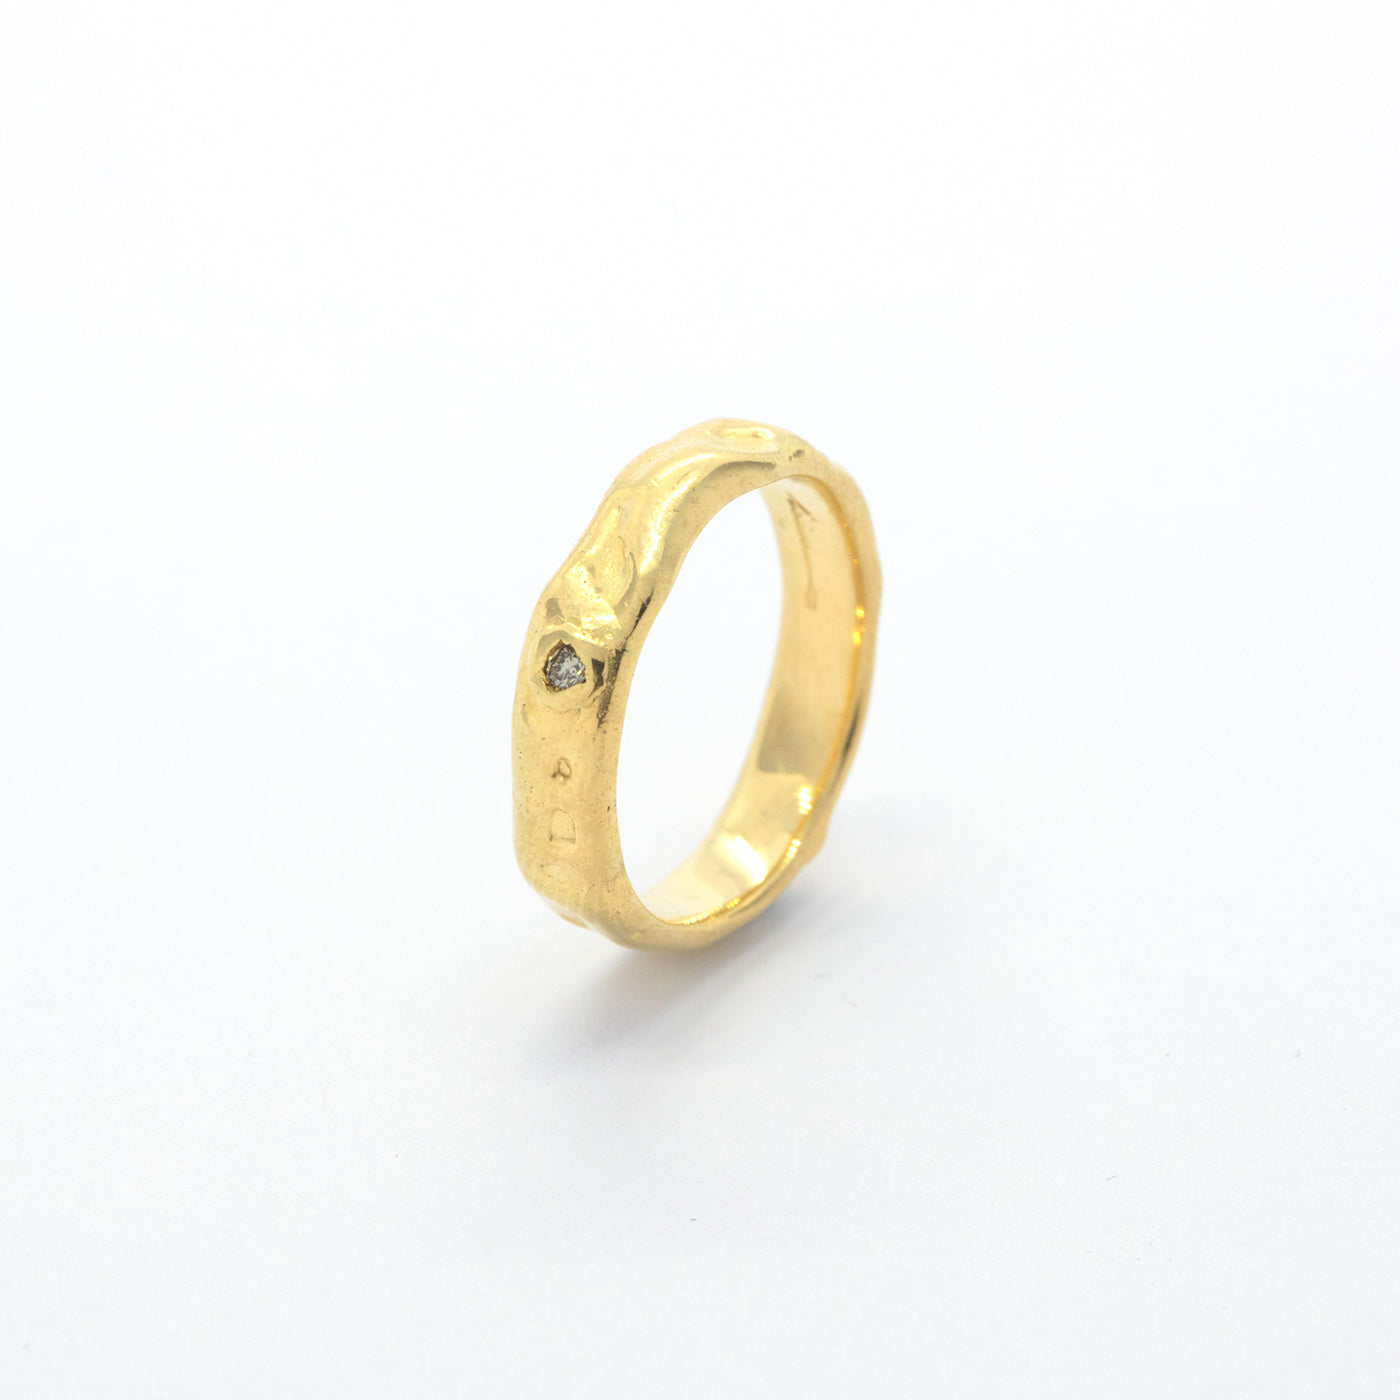 Ring Aine Wedding Band for Her 14ct or 18ct yellow gold 0.02 ct champagne diamond product side view innan jewellery independent atelier berlin